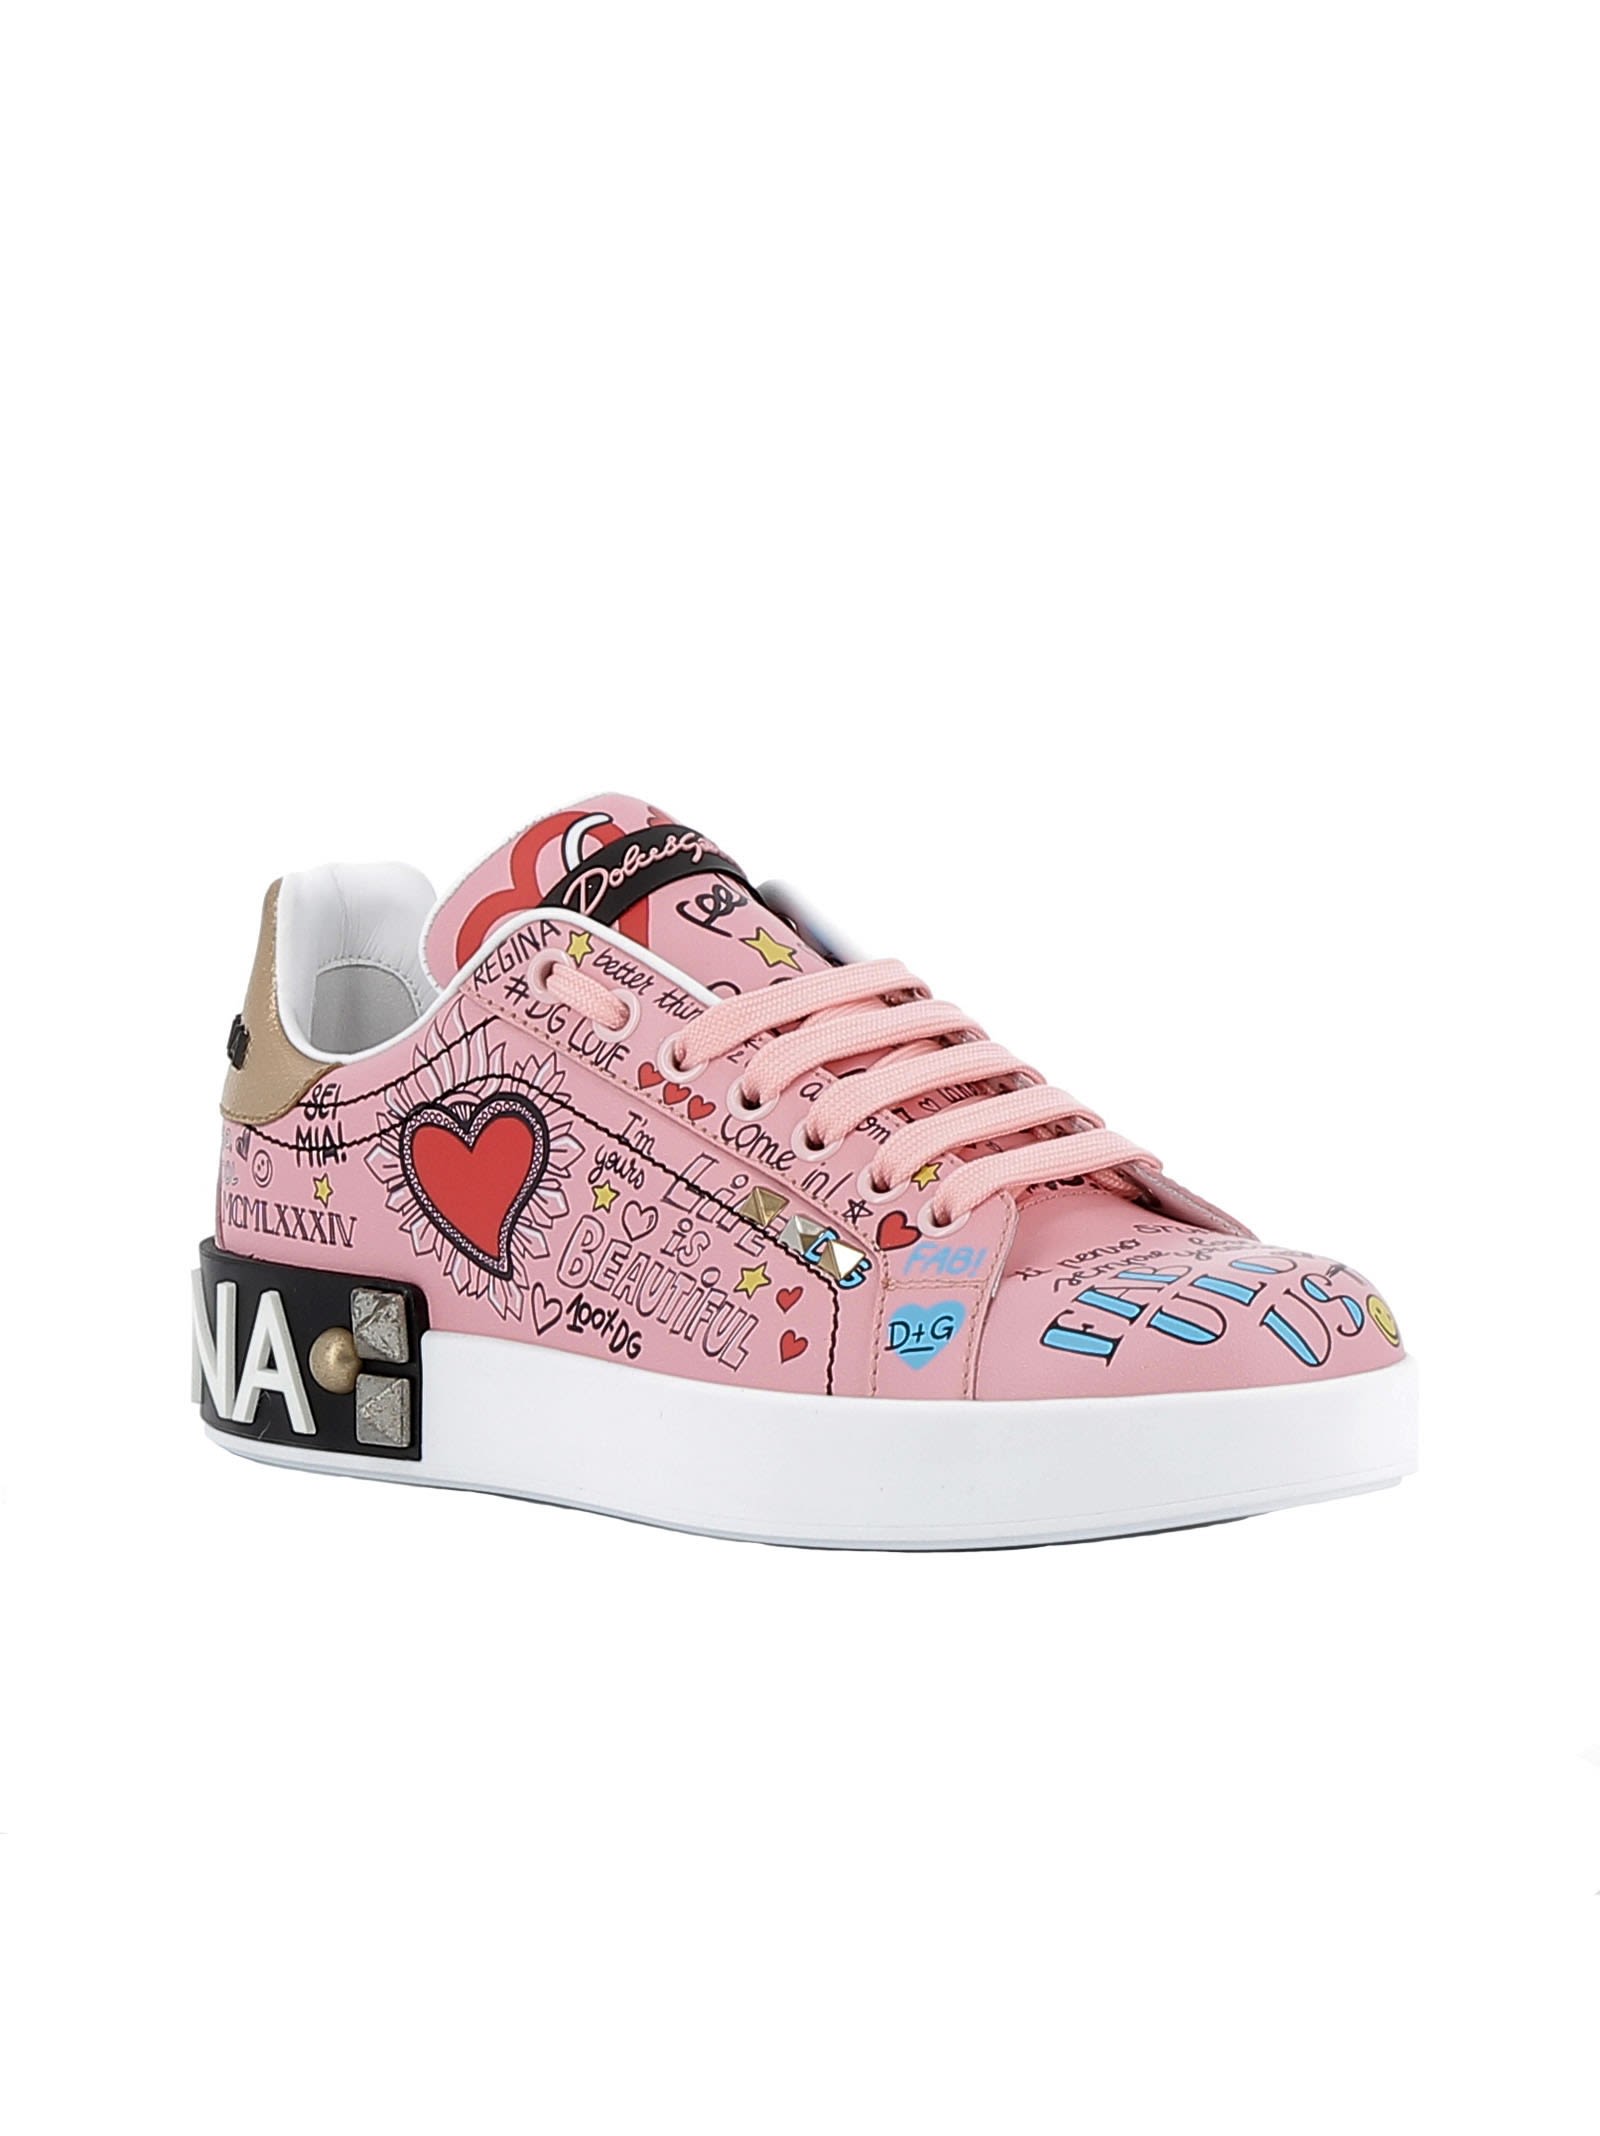 Dolce & Gabbana Dolce & Gabbana Pink Leather Sneakers - PINK - 10667837